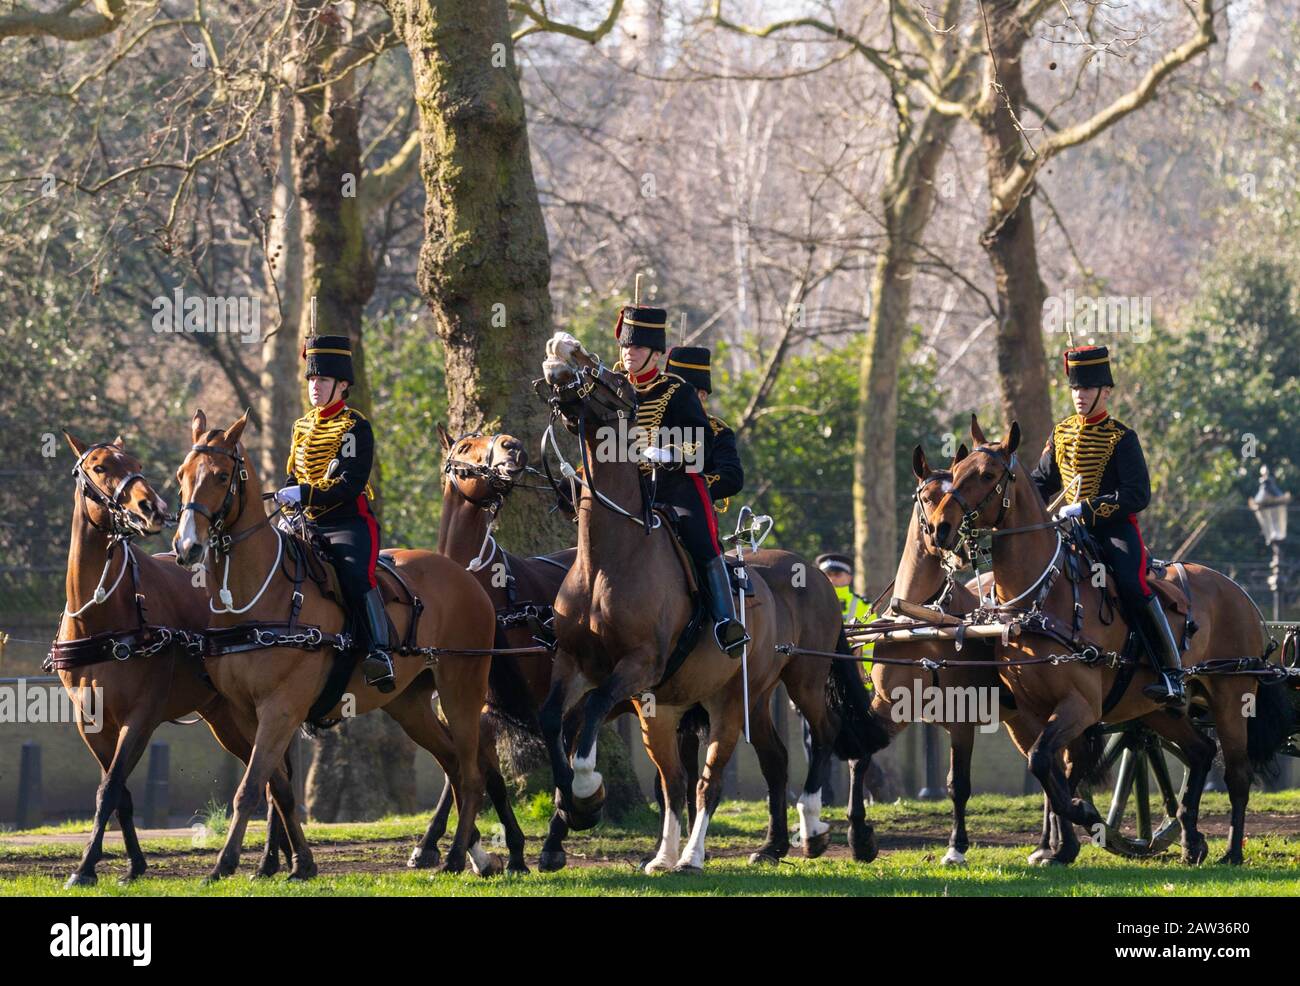 London, UK. 6th Feb, 2020. The King's Troop Royal Horse Artillery, wearing immaculately presented full dress uniform, provide a colourful sight when they ride their horses and gun carriages at The Green Park to stage a 41 Gun Royal Salute to mark the 68th Anniversary of the Accession of Her Majesty The Queen. Credit: Ian Davidson/Alamy Live News Stock Photo